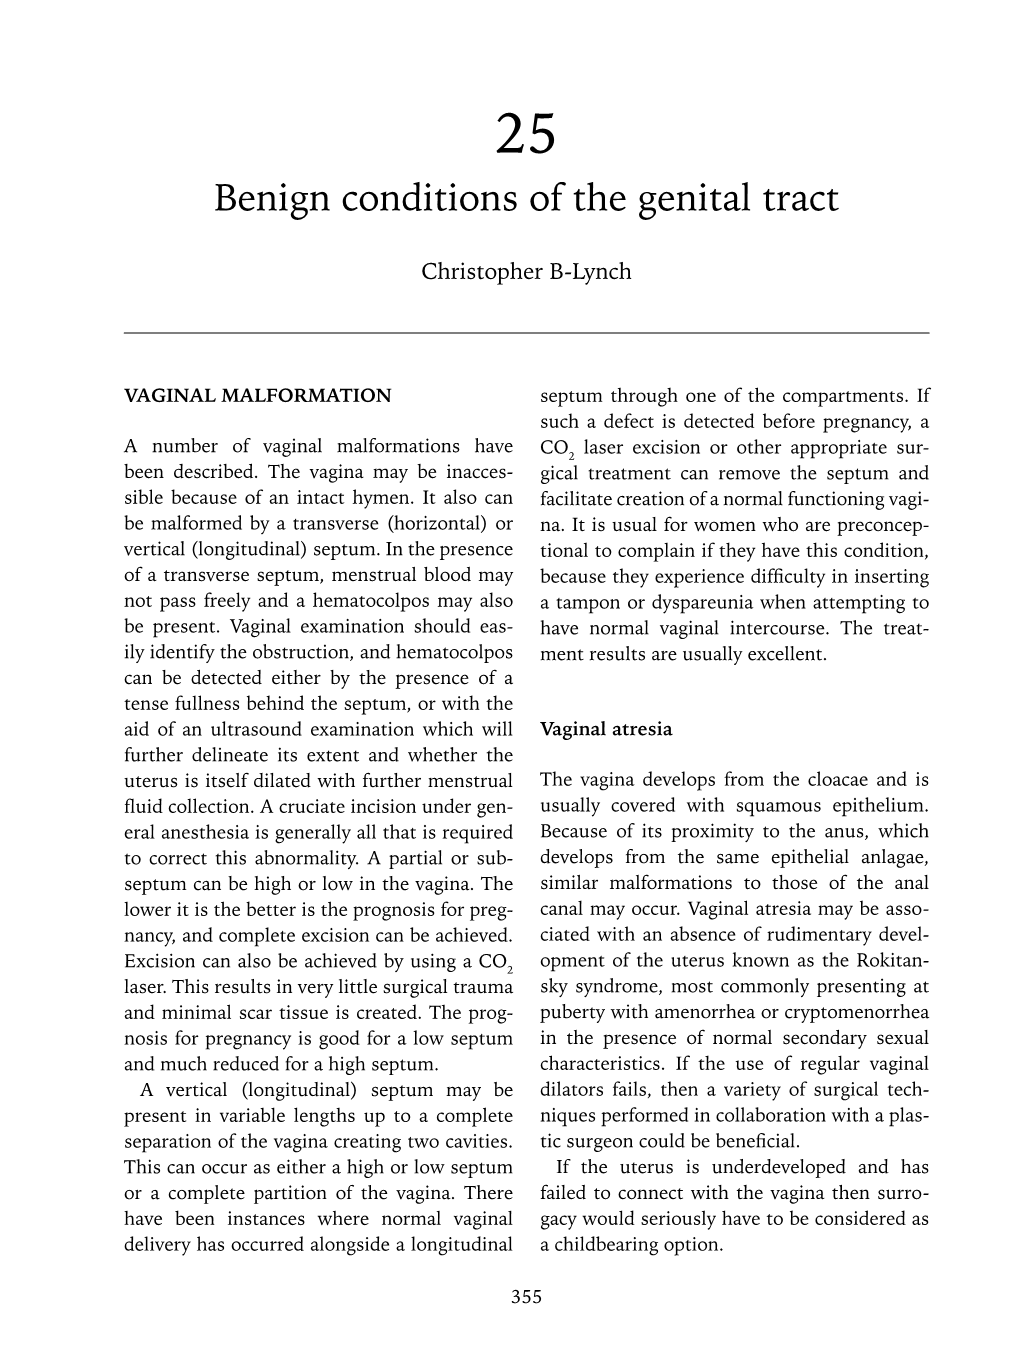 Benign Conditions of the Genital Tract